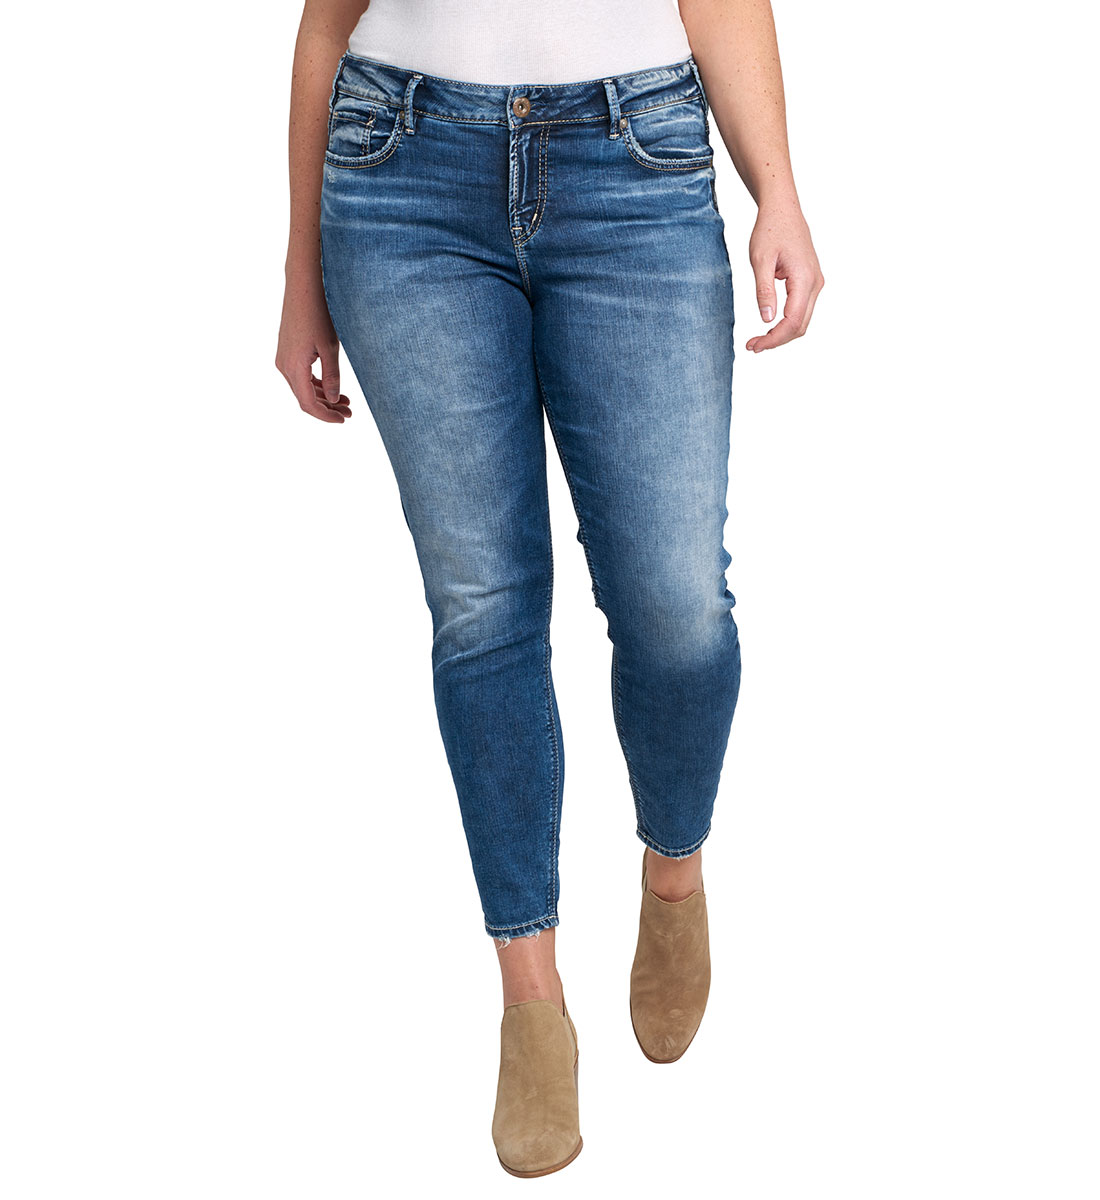 aiko silver jeans clearance